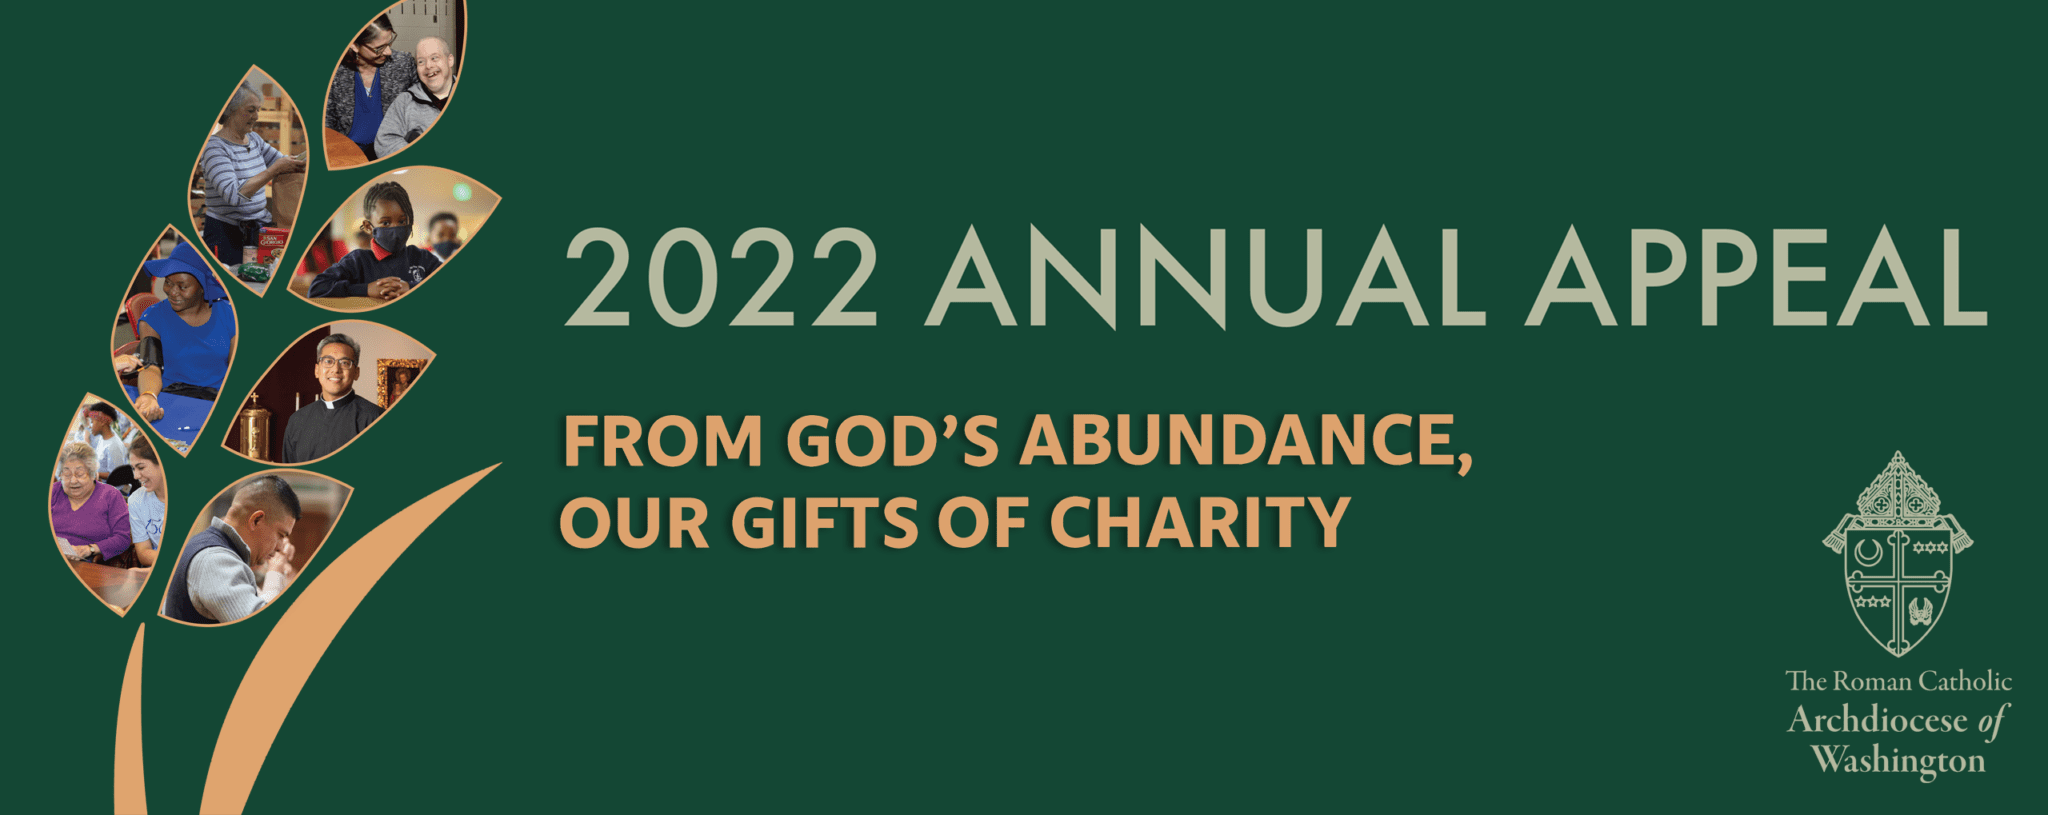 2022 Annual Appeal